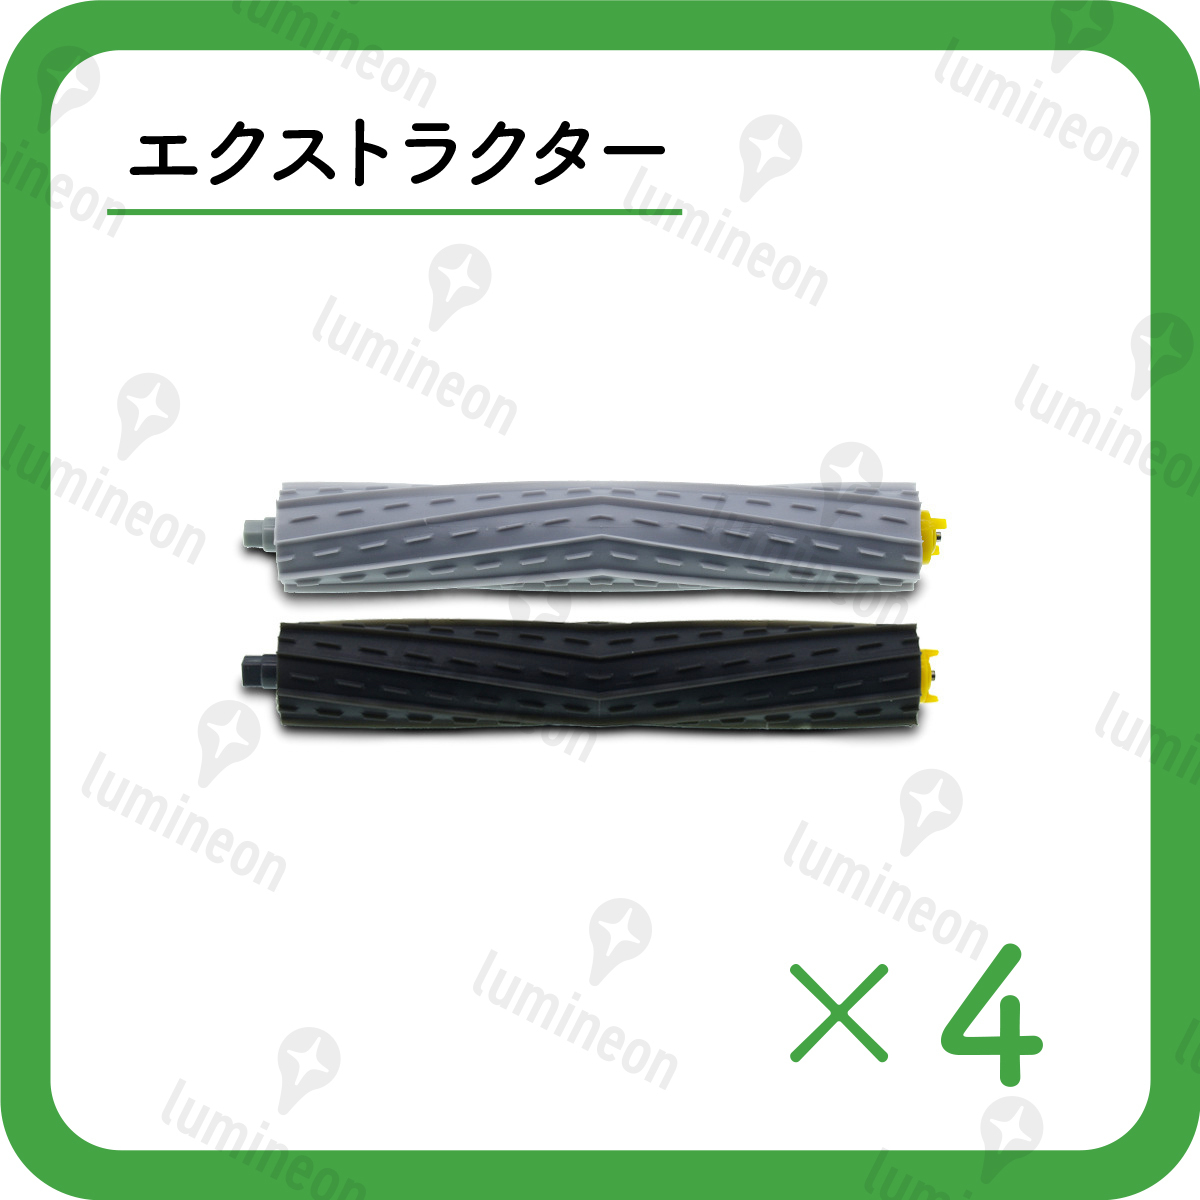  roomba 800 900 series 14 point set interchangeable goods edge strengthen rotation brush exchange parts consumable goods roller accessory feather filter g010b 1